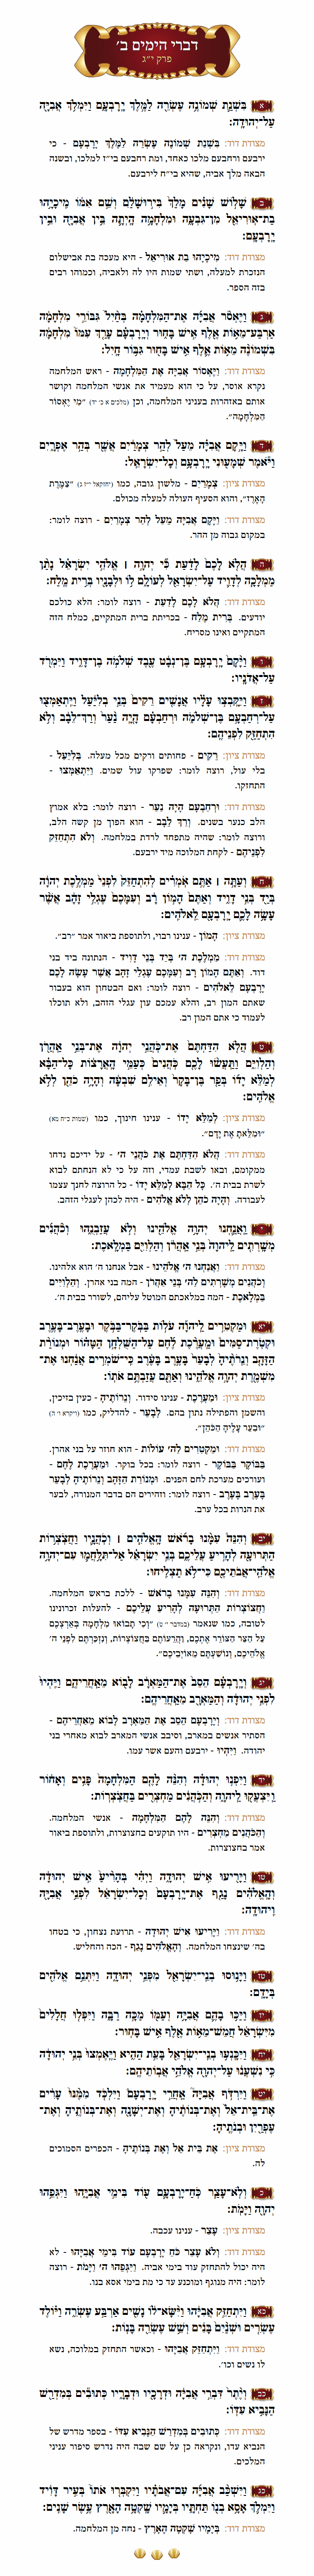 Sefer Divrei Hayomim 2 Chapter 13 with commentary